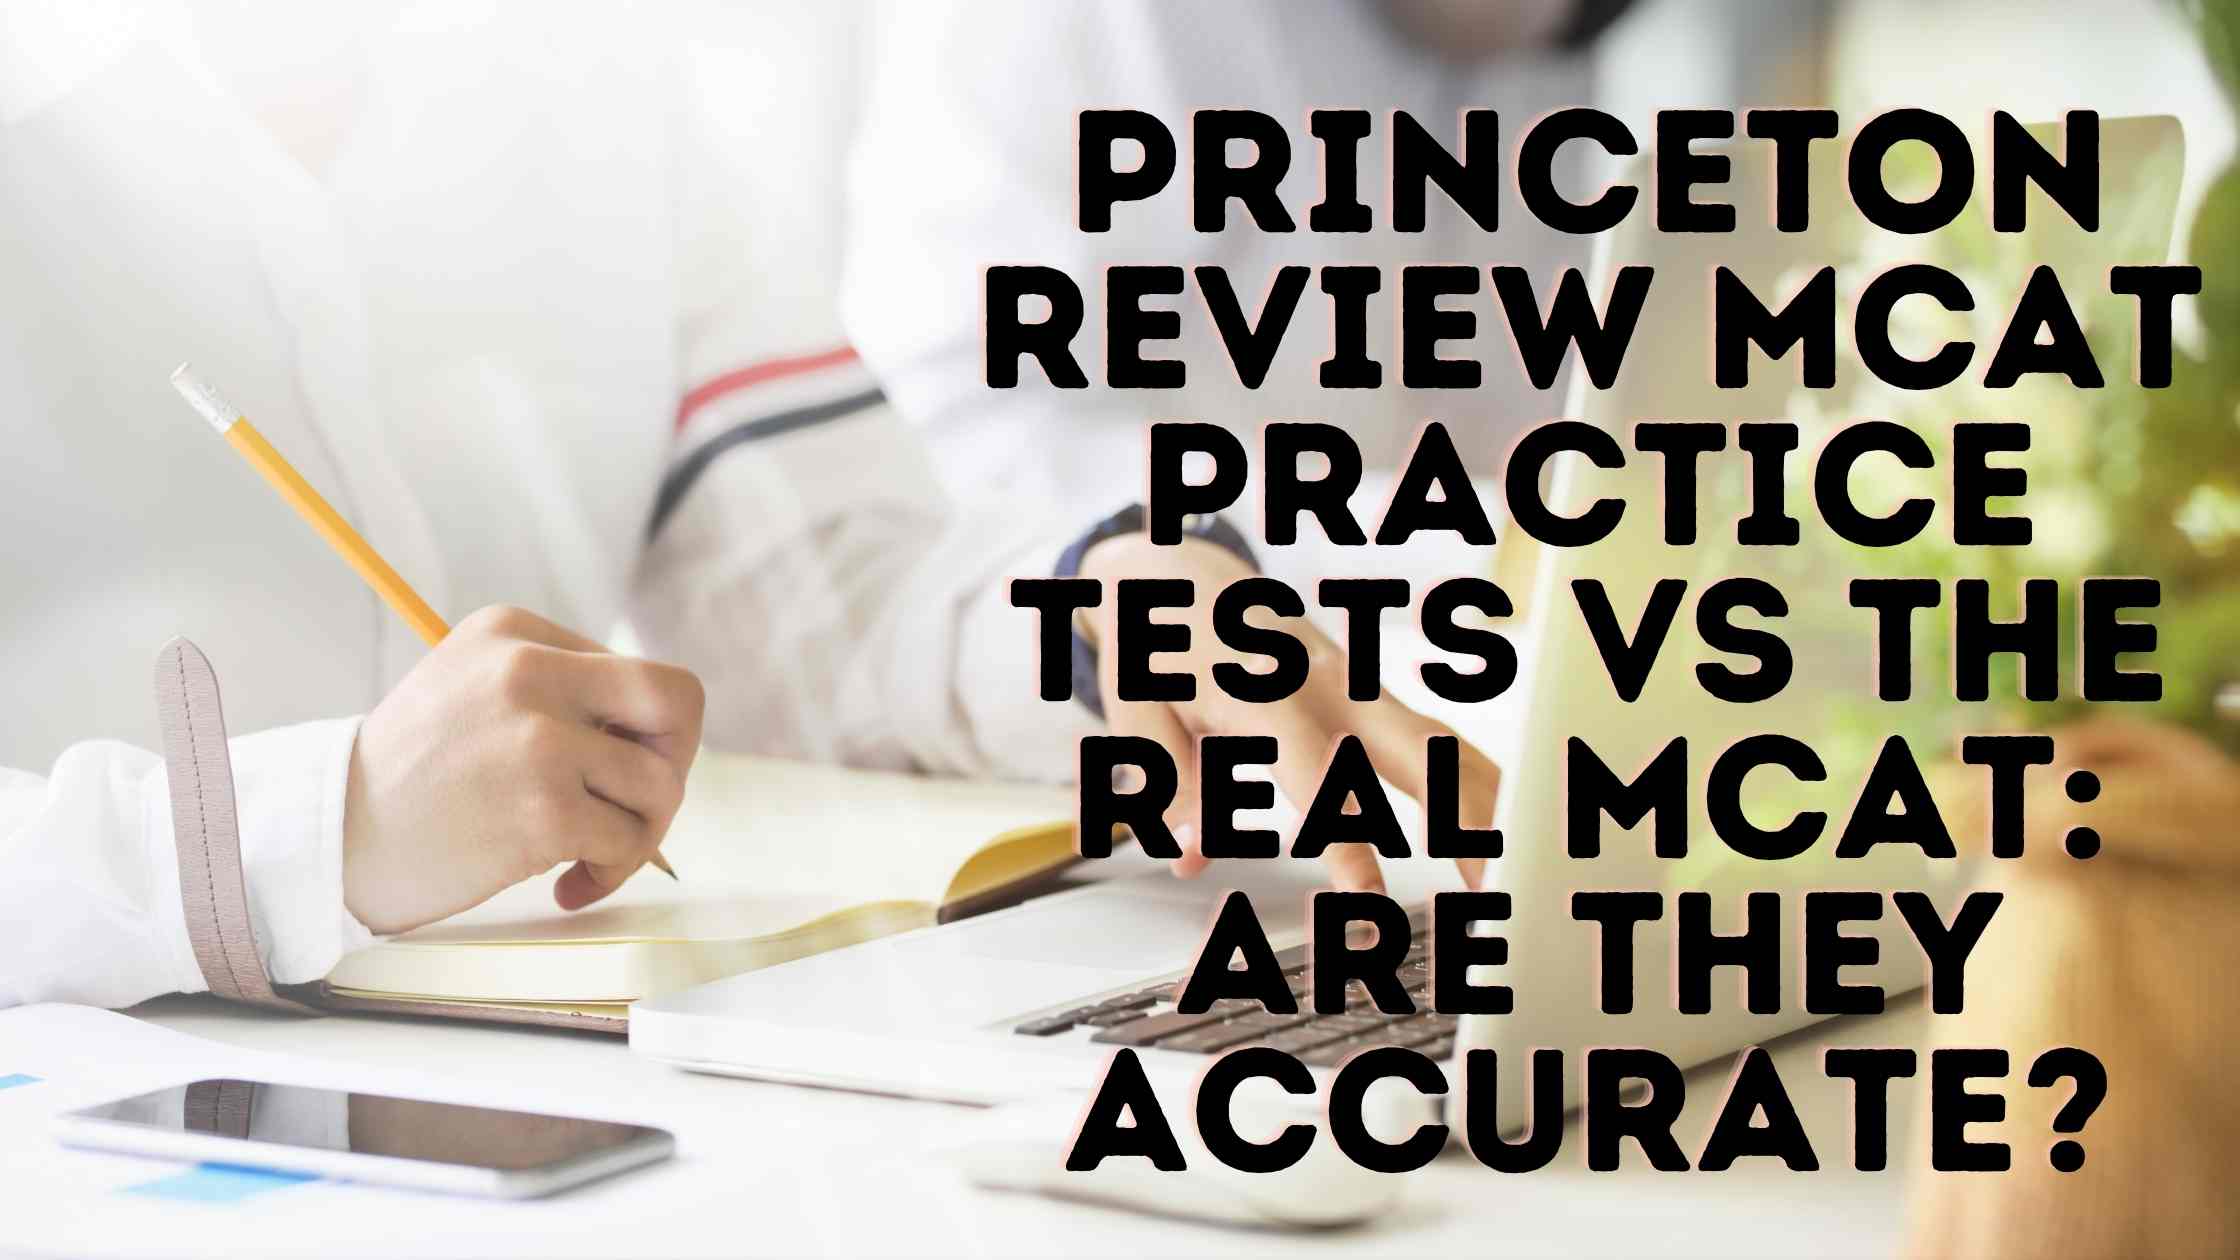 Princeton Review MCAT Practice Tests VS The Real MCAT: Are They Accurate?